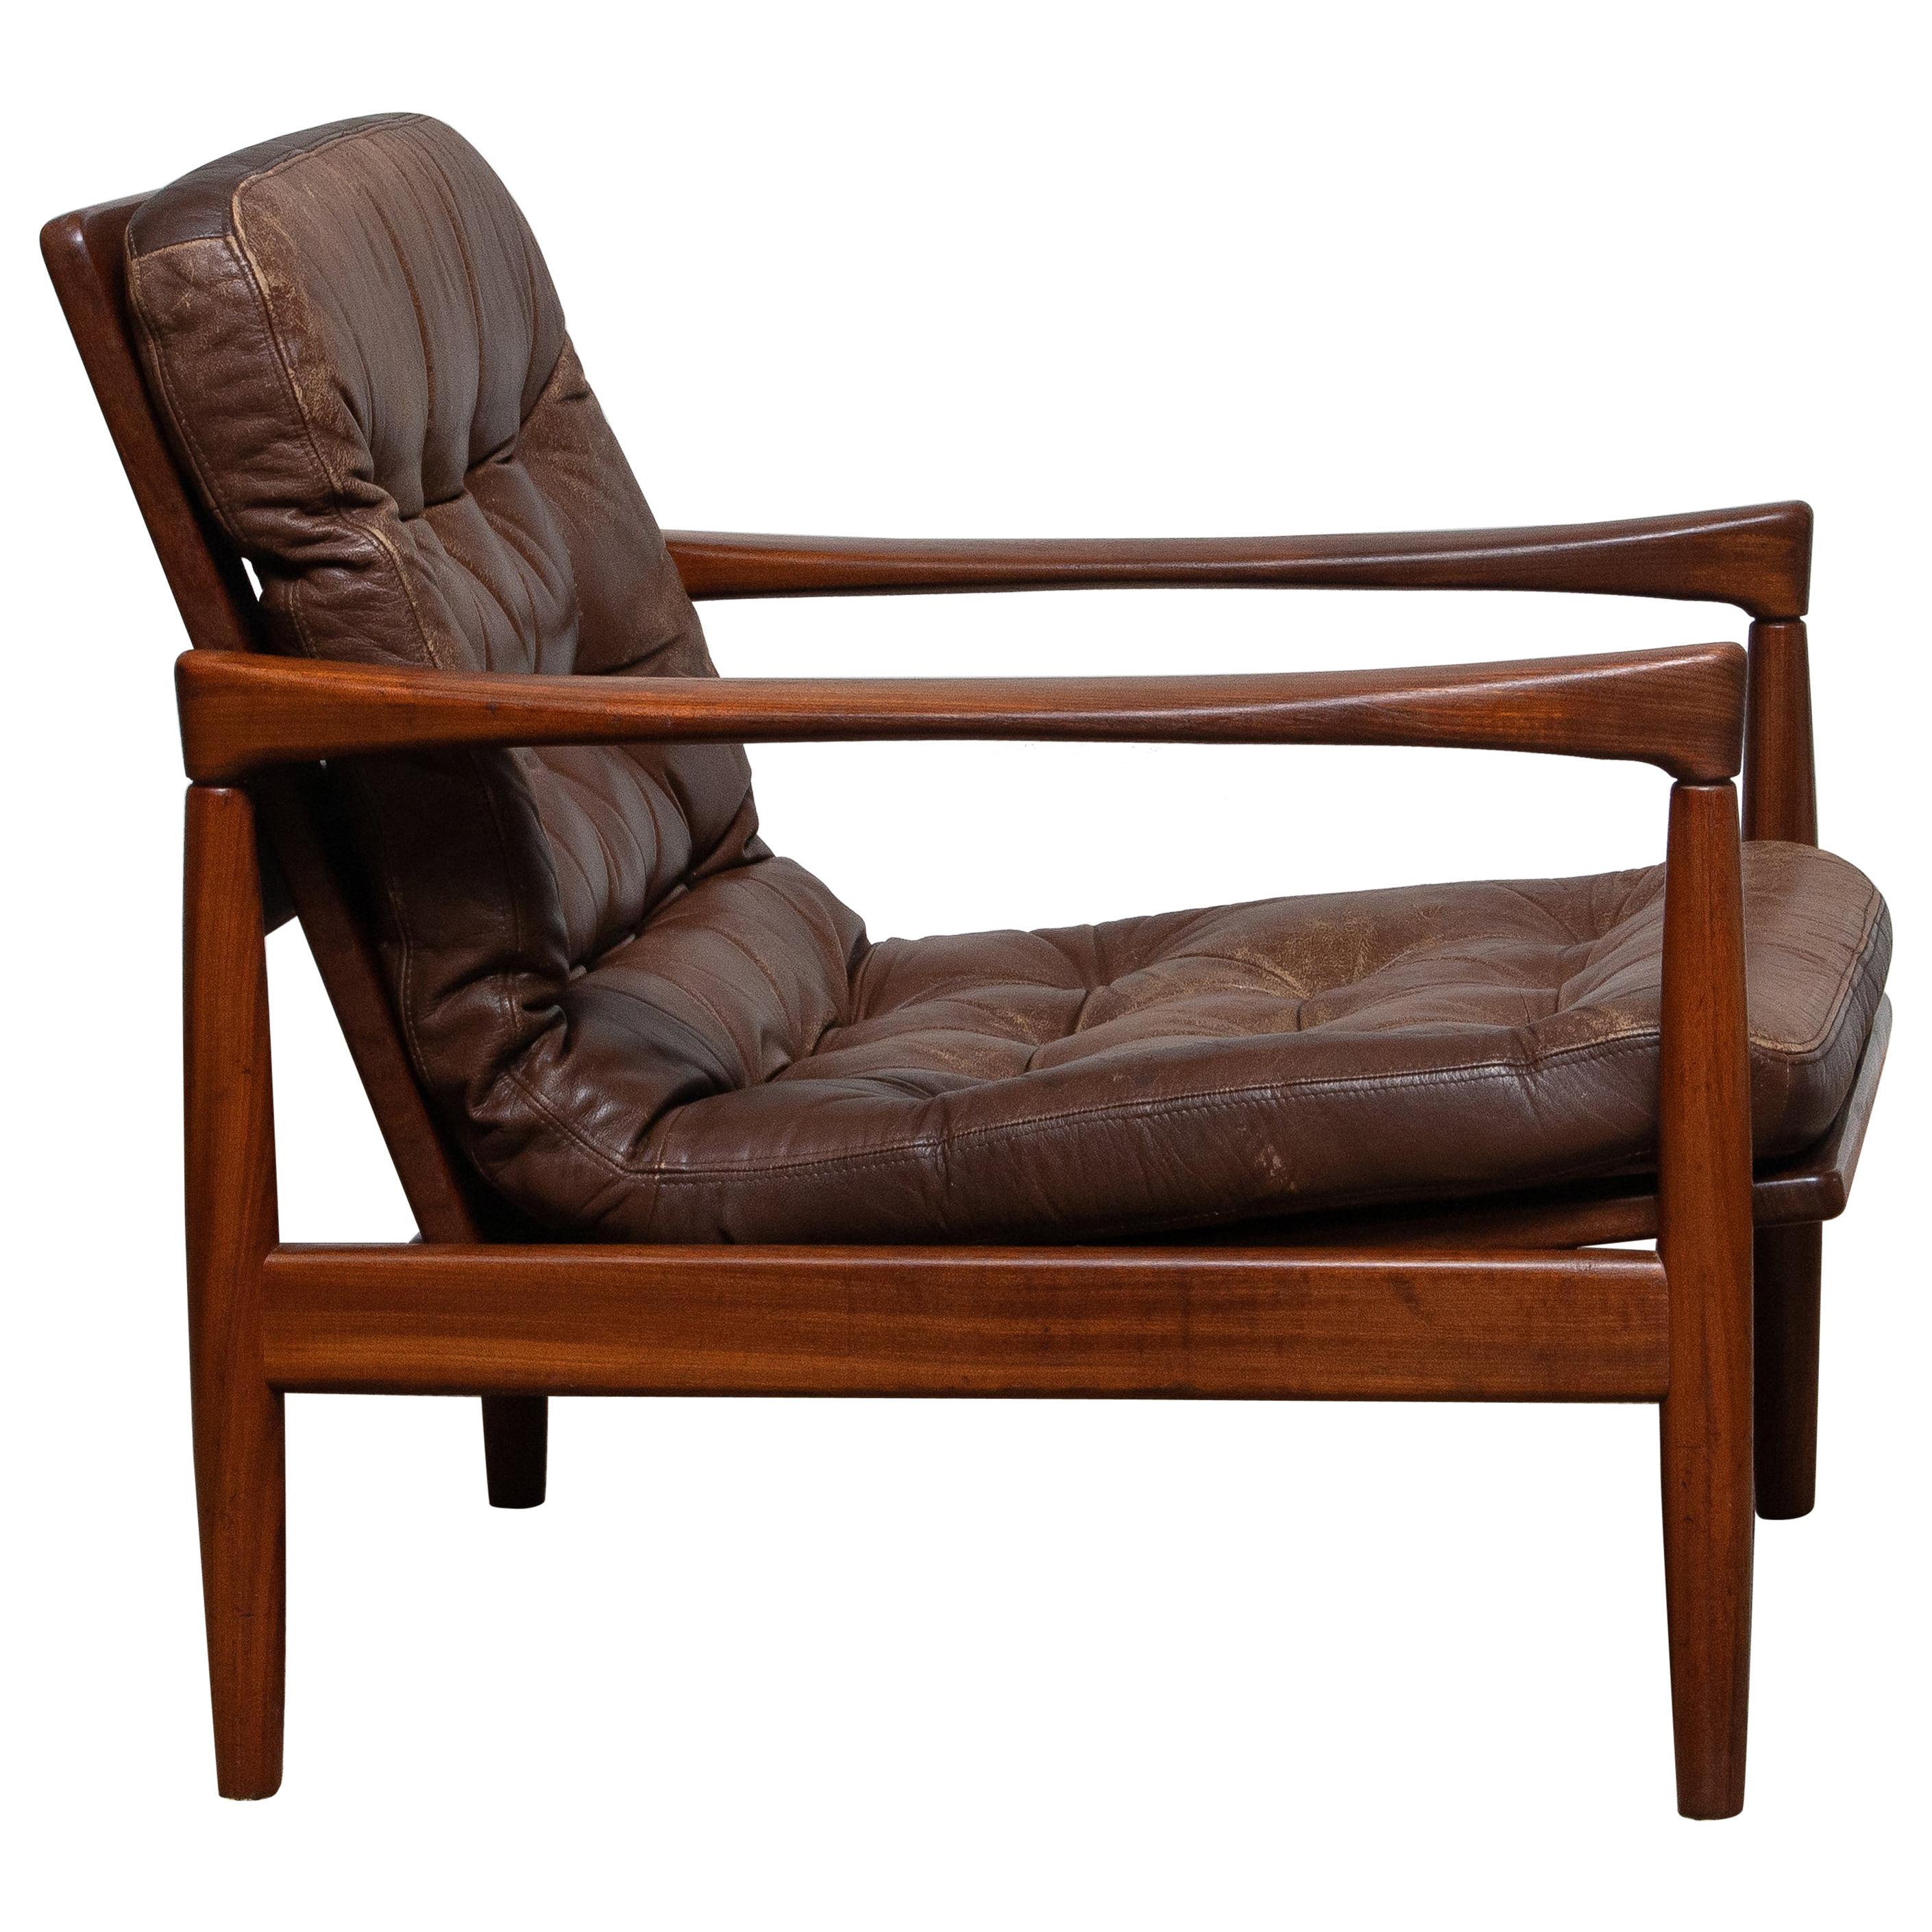 Mid-Century Modern 1960s, Teak and Brown Leather Lounge Chair by Erik Wörtz for Bröderna Anderssons